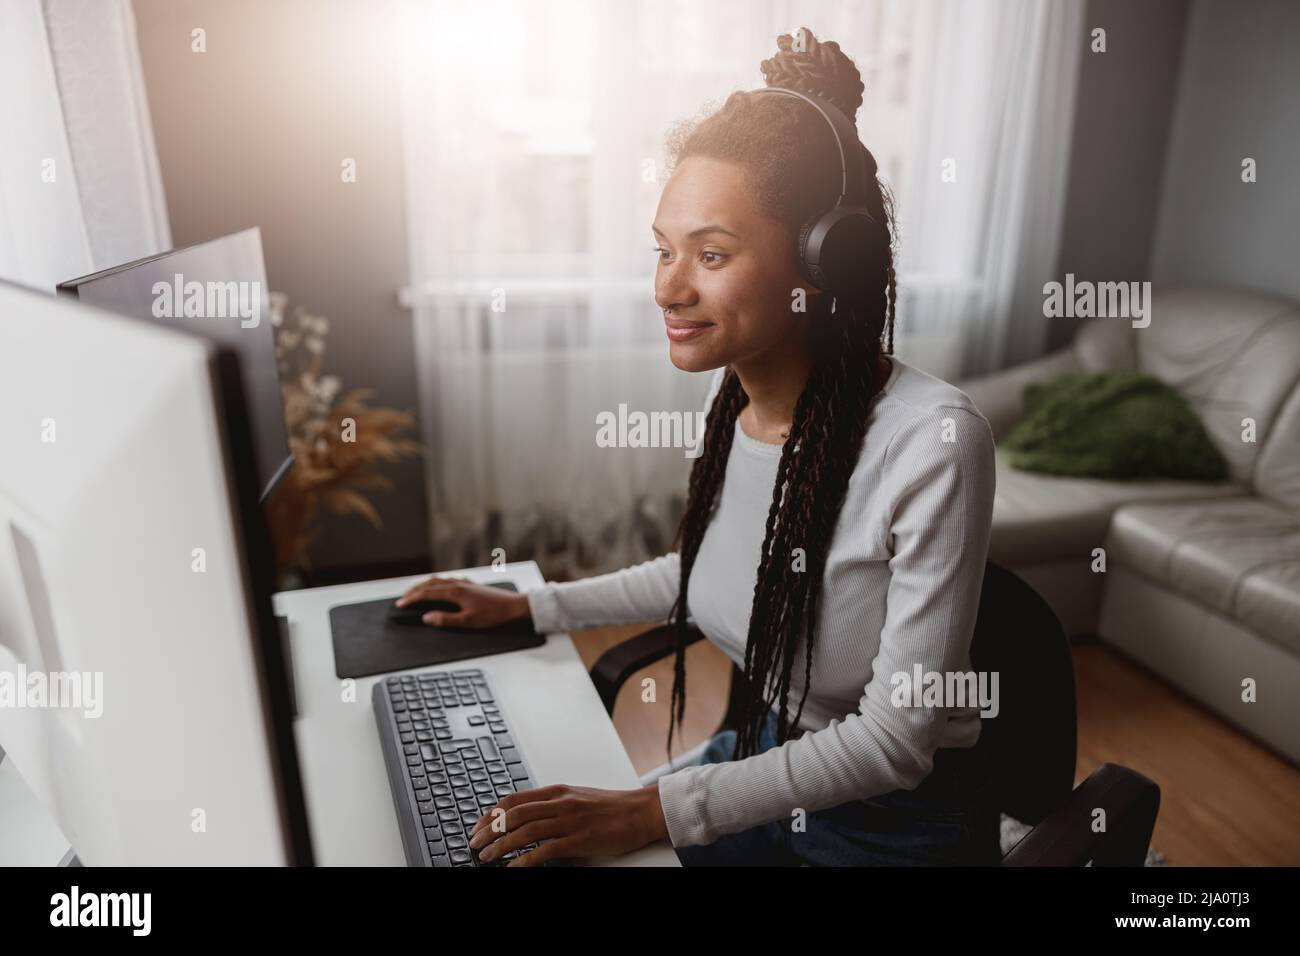 Portrait of smiled beautiful woman developer working indoor, stylish young female using computer Stock Photo